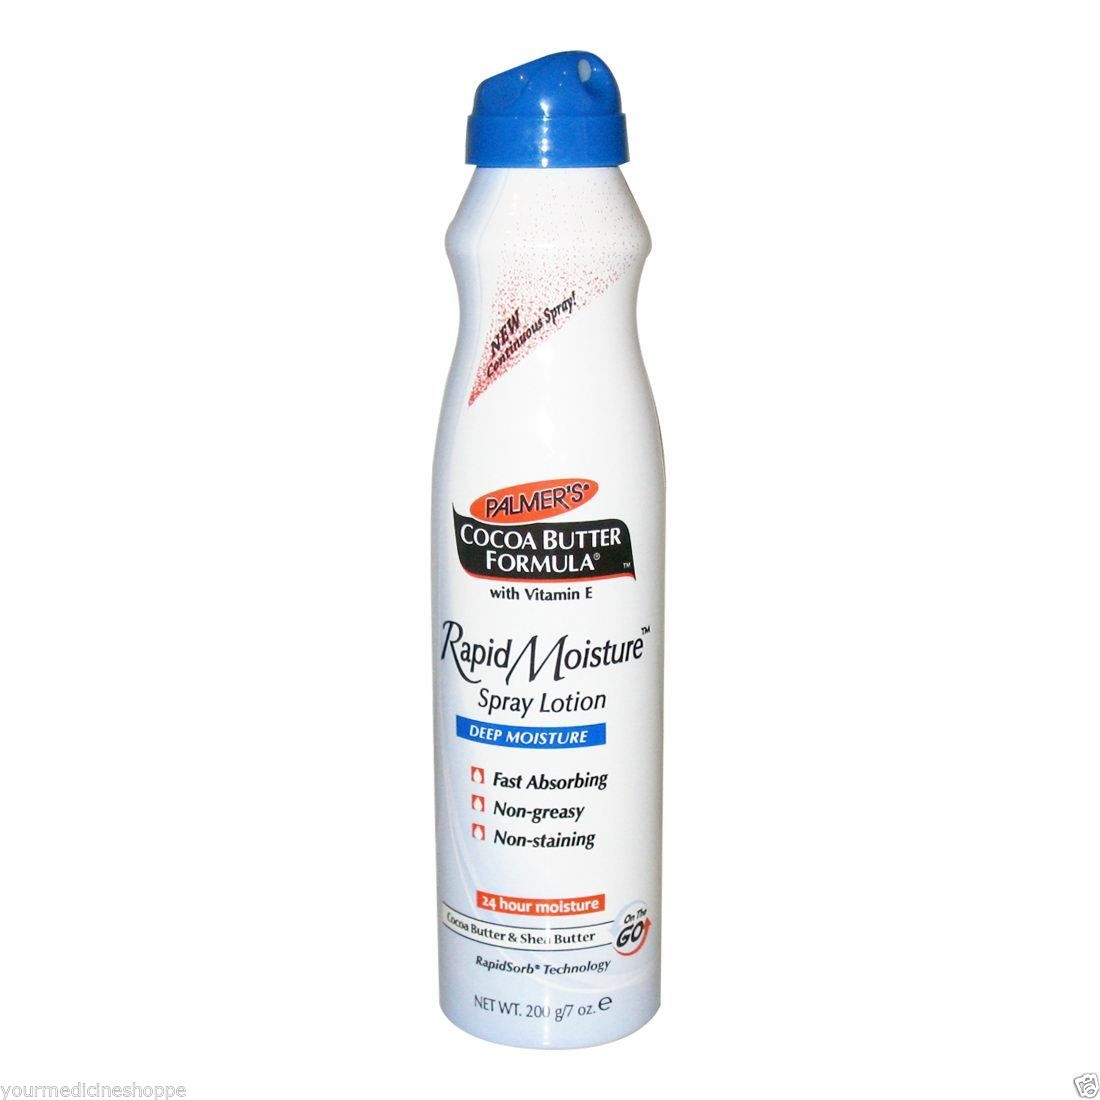 Palmer's® Cocoa Butter Formula® Rapid Moisture Spray Lotion, 7 oz - image 2 of 2